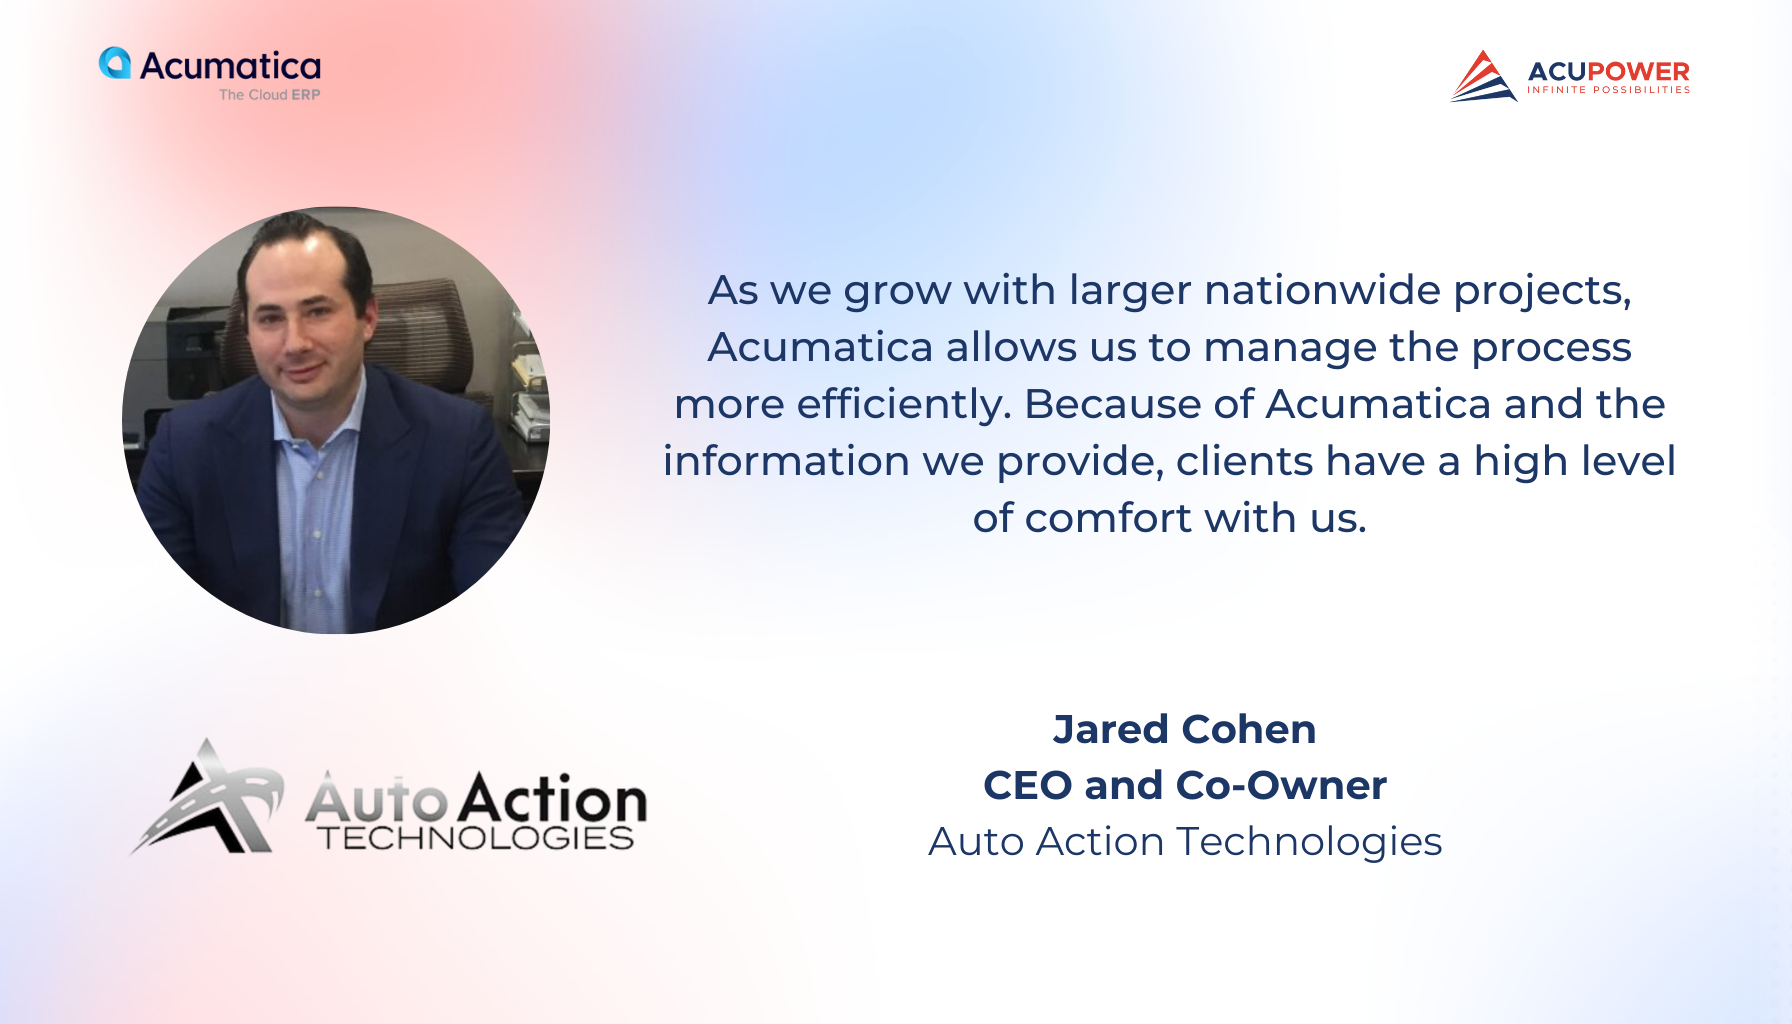 Success story of Auto Action Technologies with Acumatica Cloud ERP